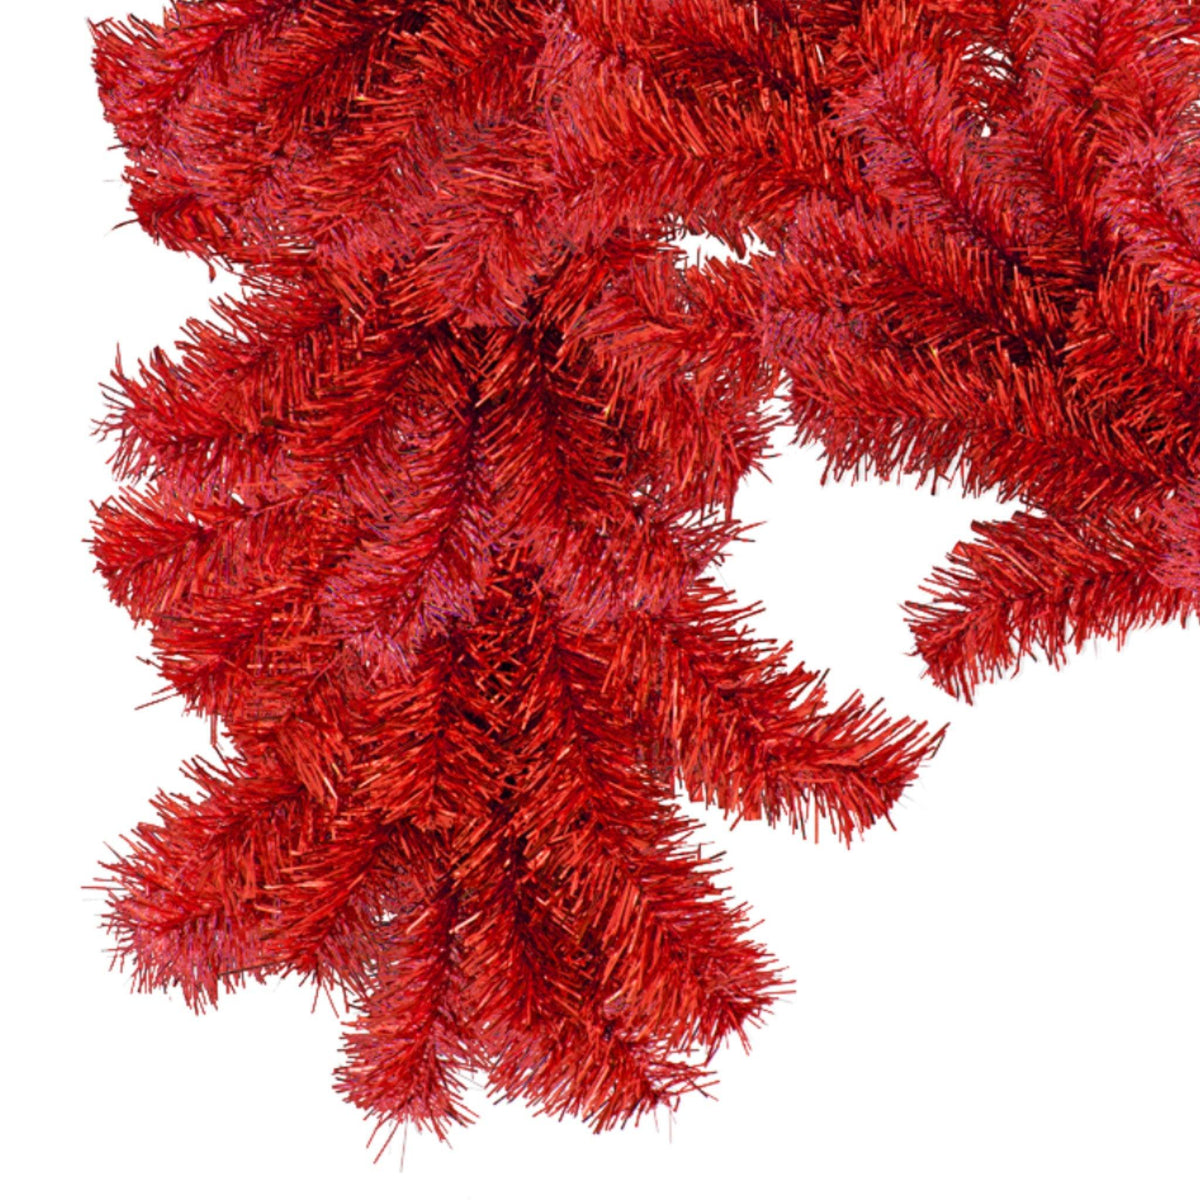 Shop for Lee Display's brand new 6FT Shiny Metallic Red Tinsel Brush Garlands on sale now at leedisplay.com.  End